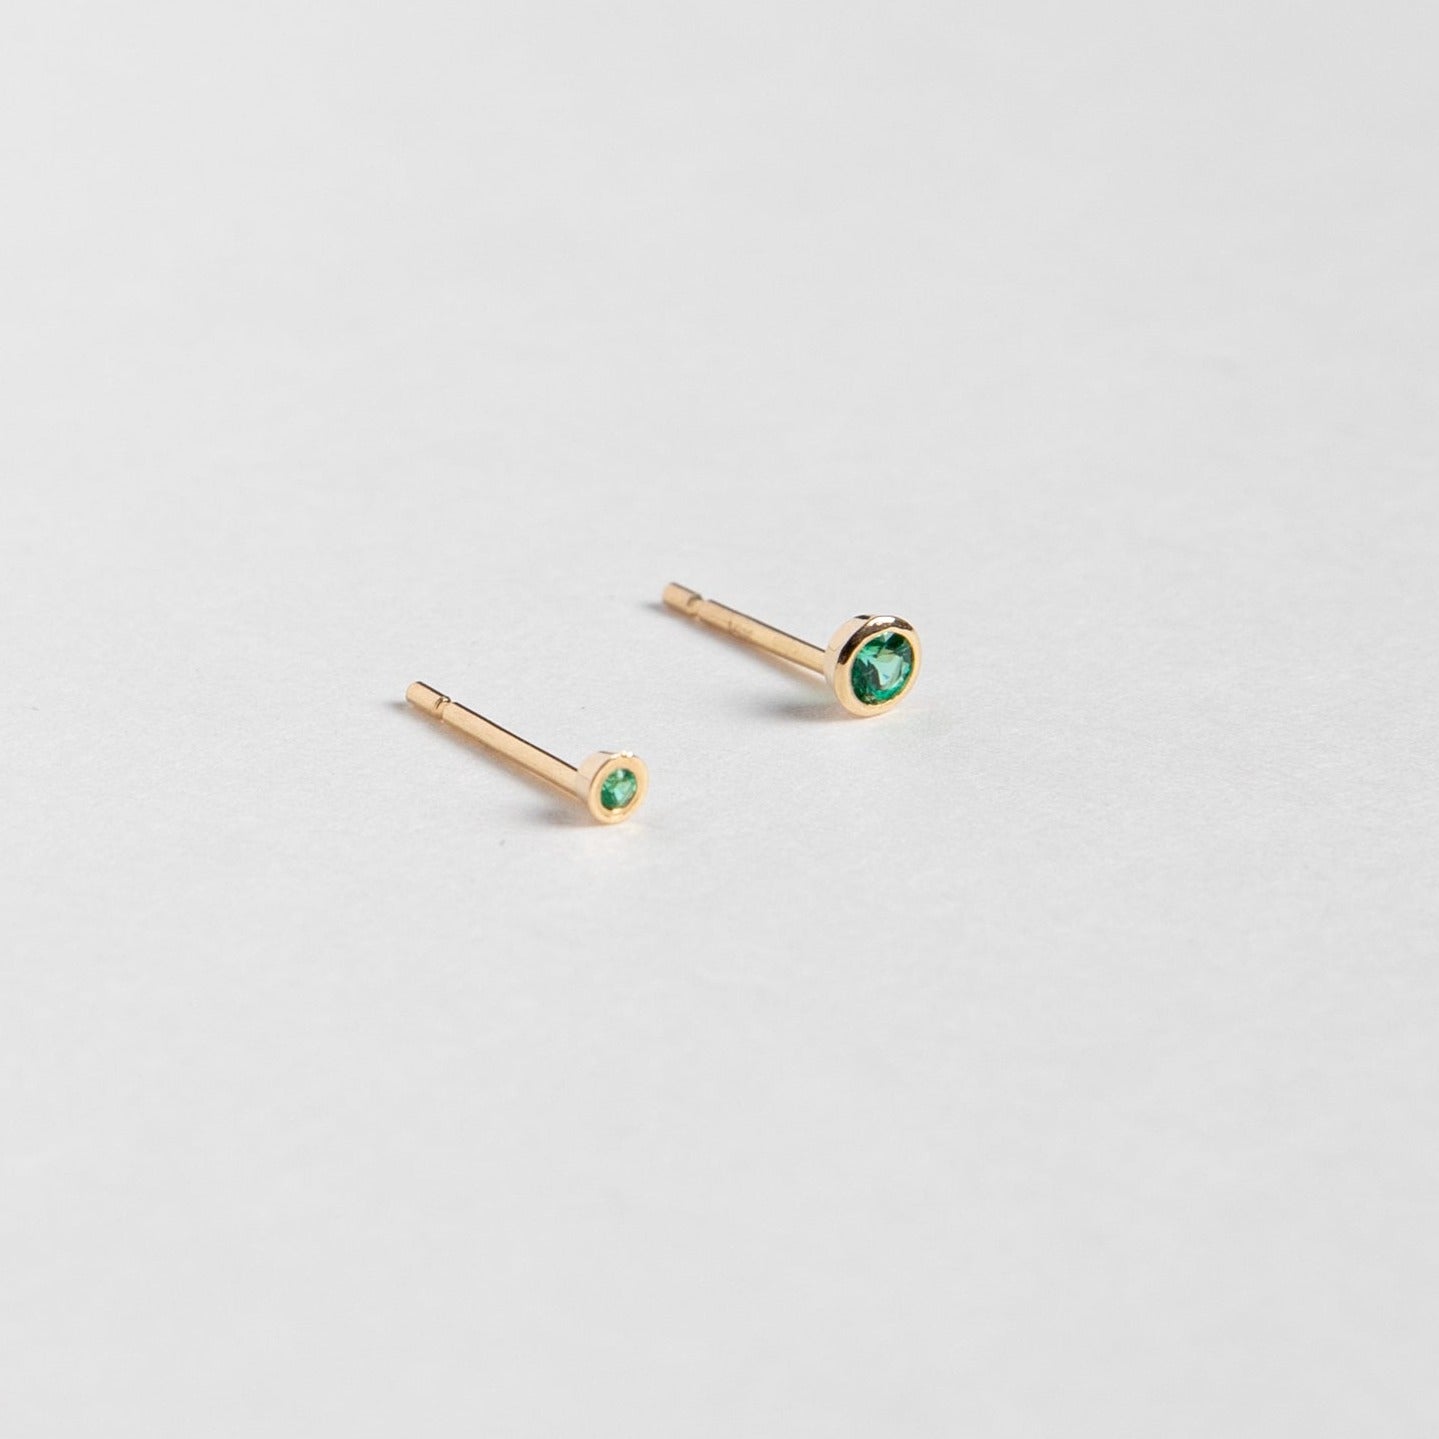 Small Kaya Designer Stud in 14k Gold set with Emeralds by SHW Fine Jewelry